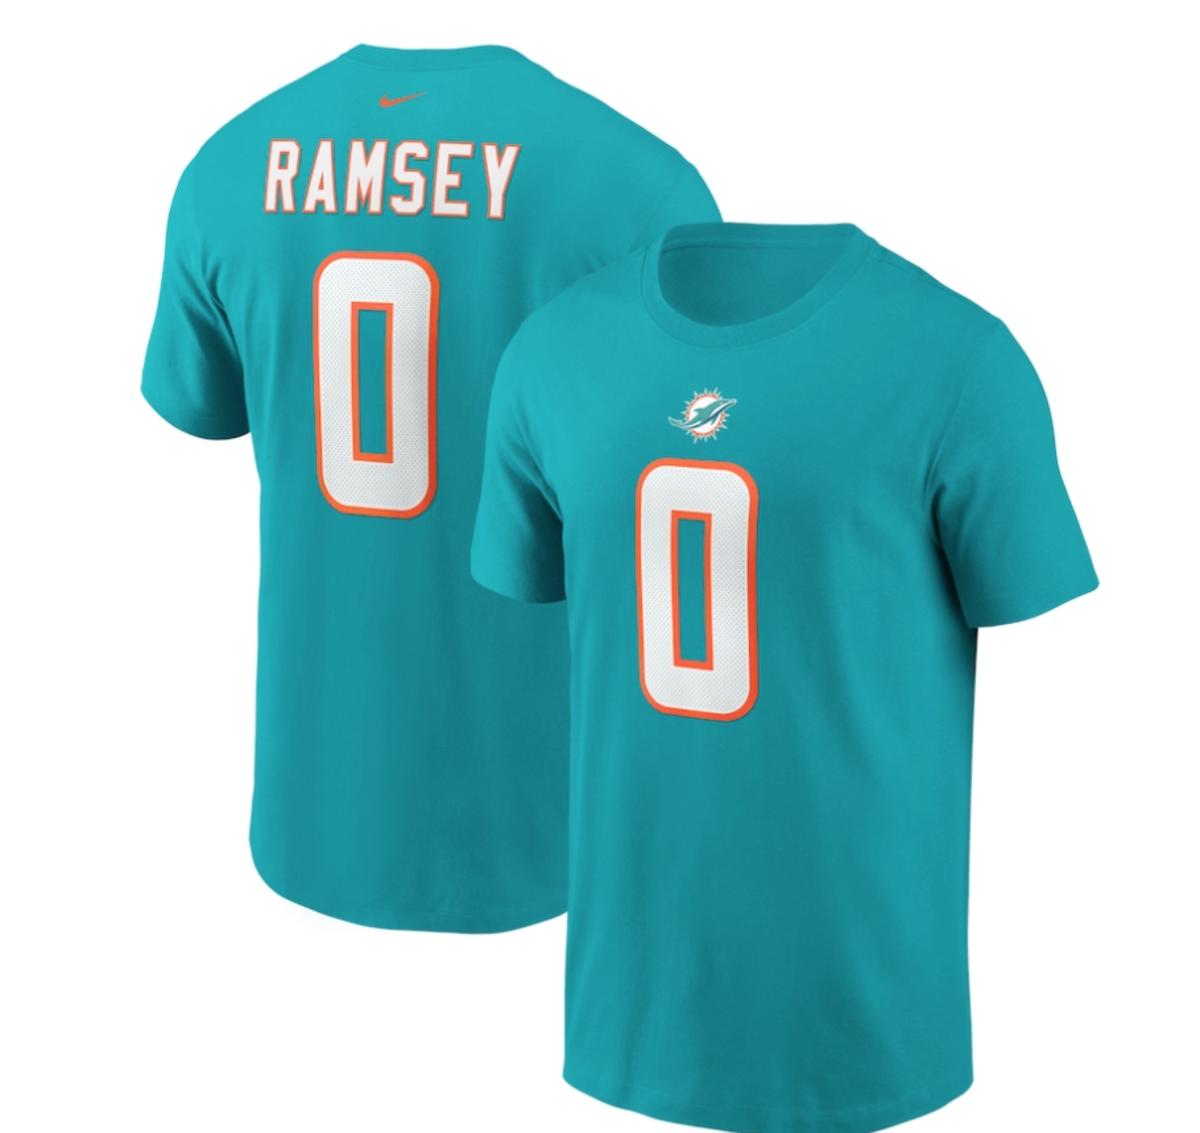 Jalen Ramsey Miami Dolphins Nike Player Name & Number T-Shirt - $39.99